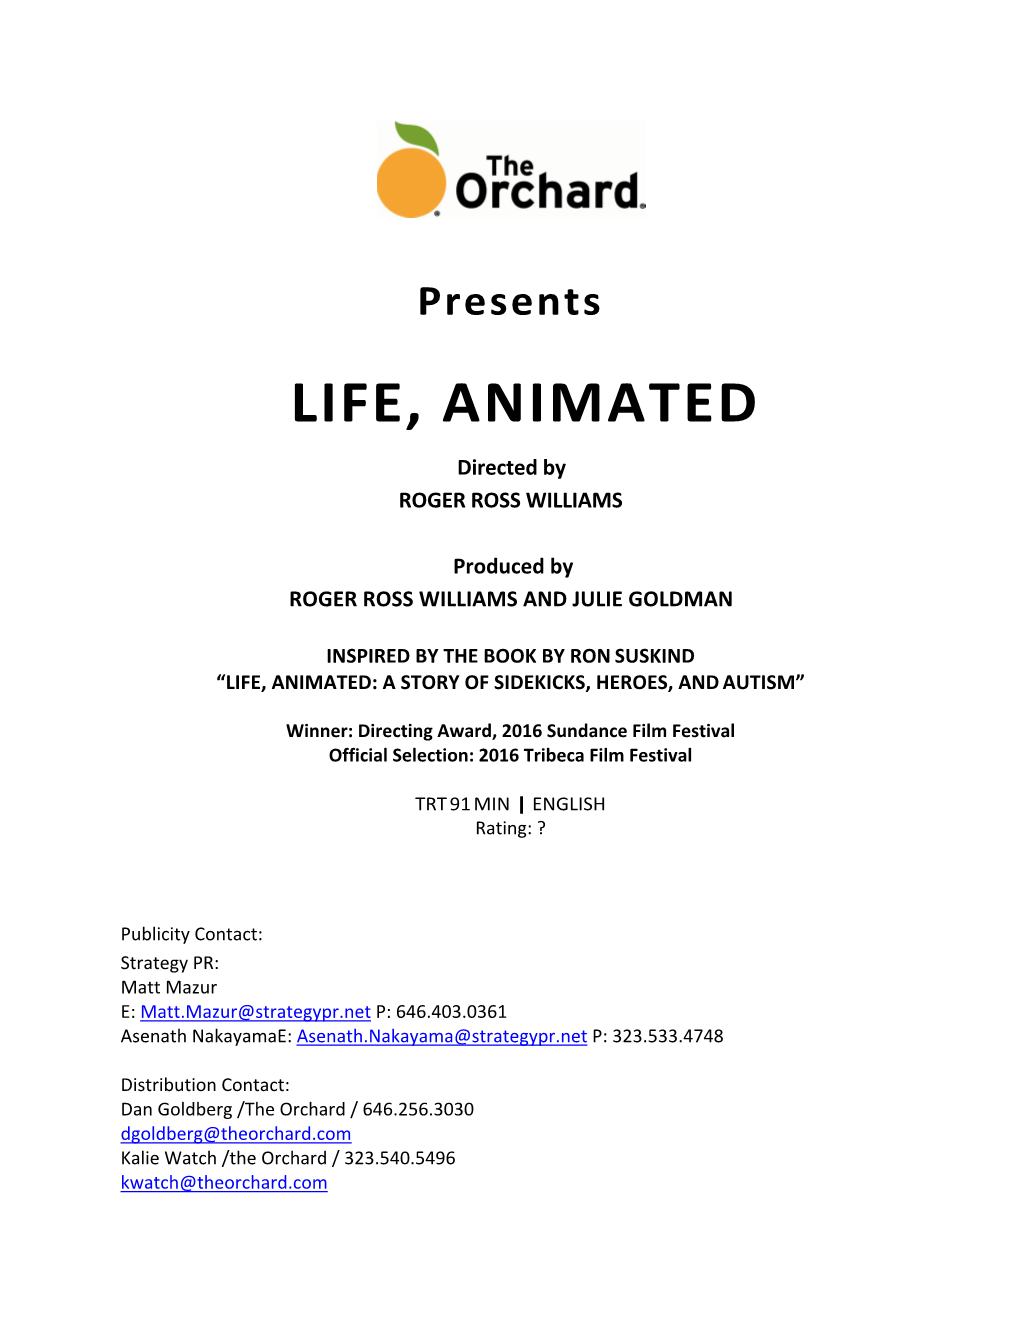 LIFE, ANIMATED Directed by ROGER ROSS WILLIAMS